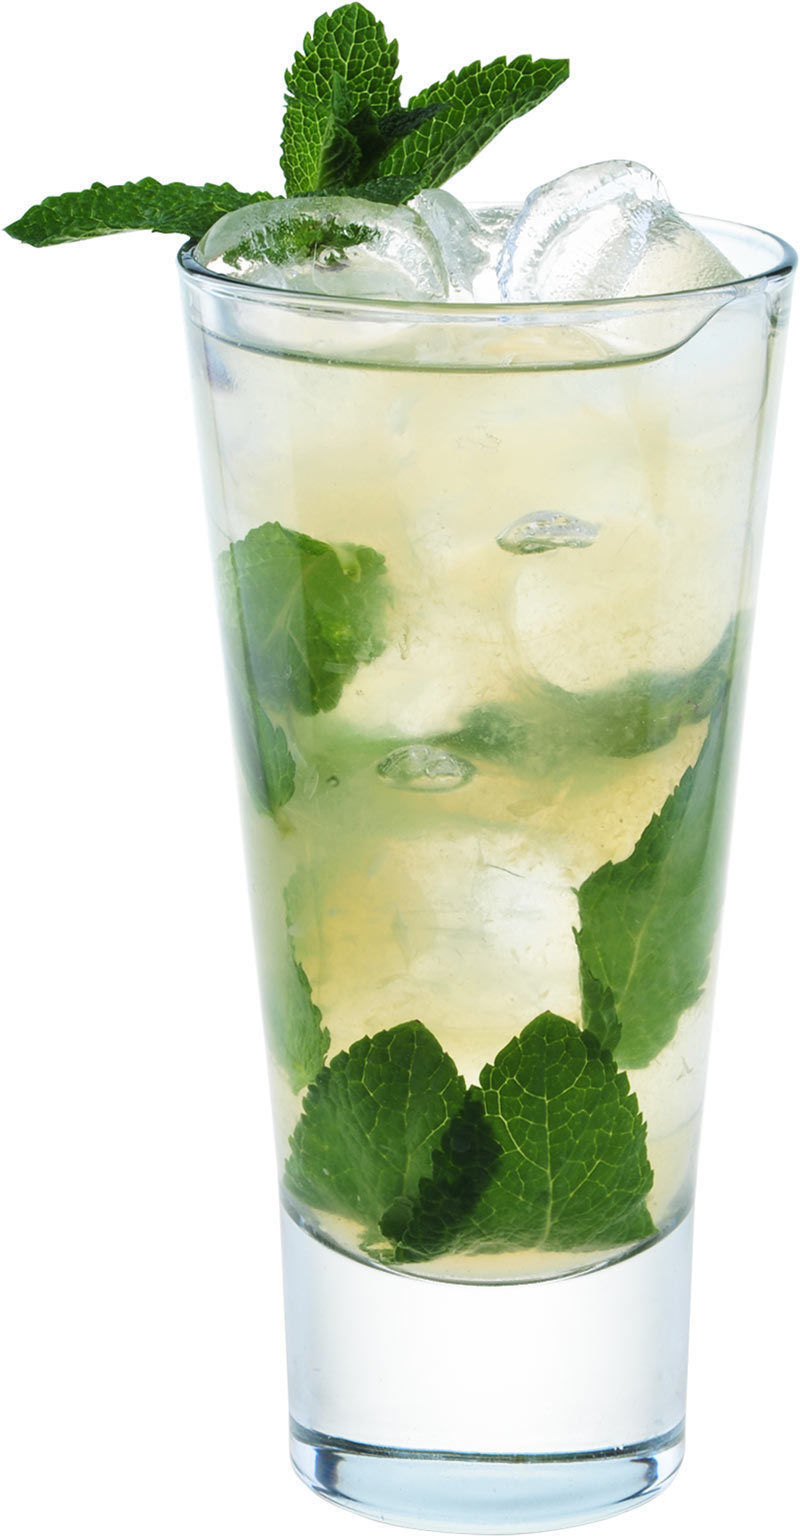 How to Make the Vodka with Mint Tea